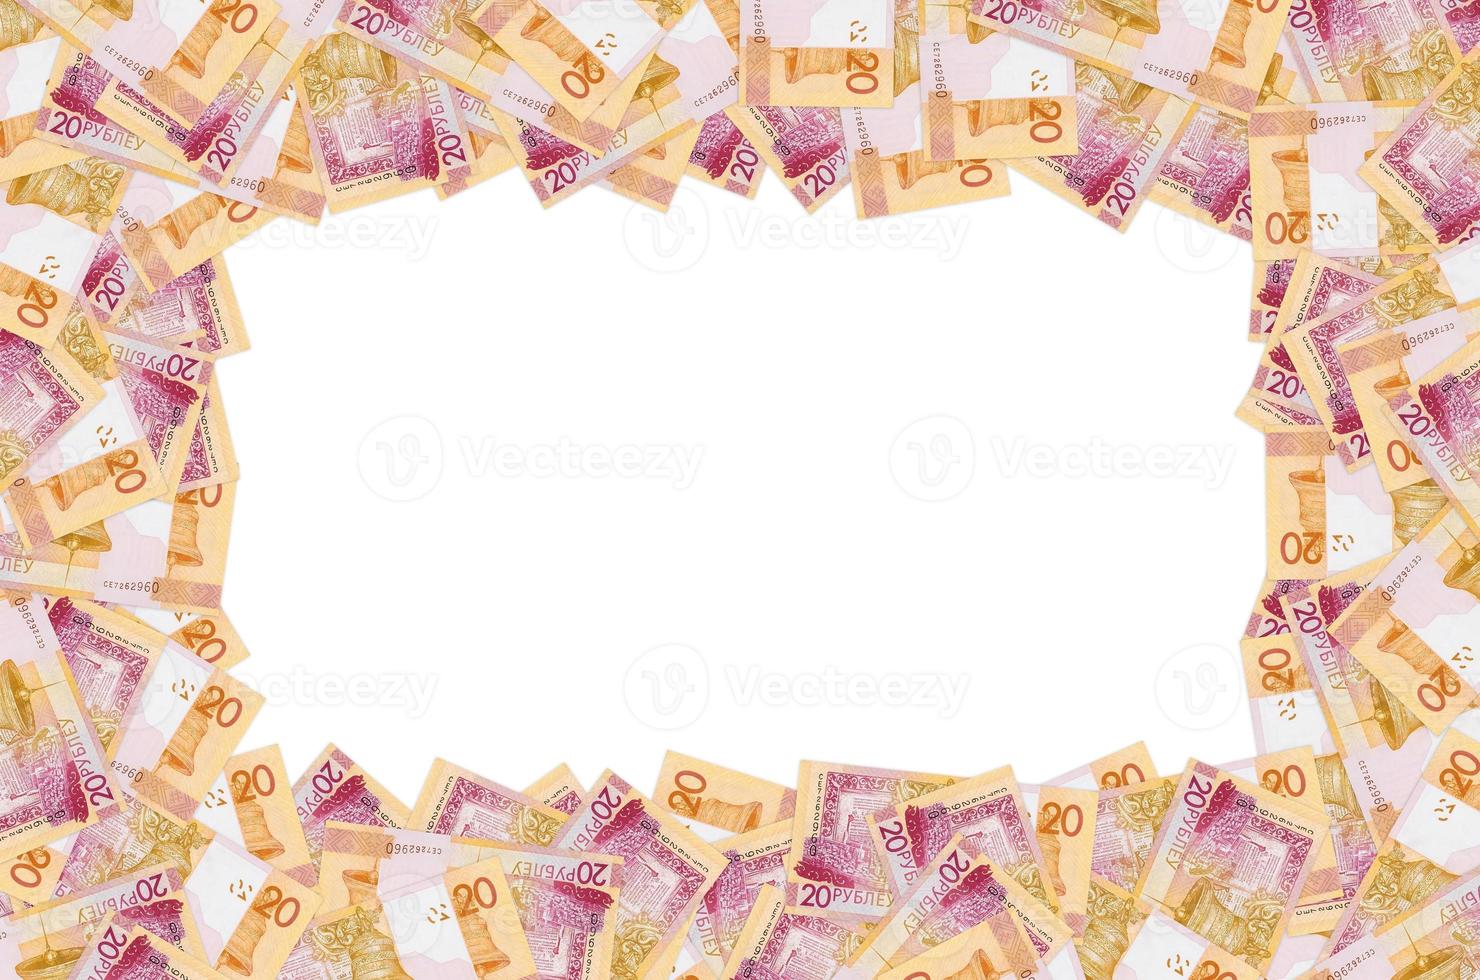 Pattern of new Belarusian money twenty rubles. Developed in 2009 after the Belarusian banknotes denomination photo